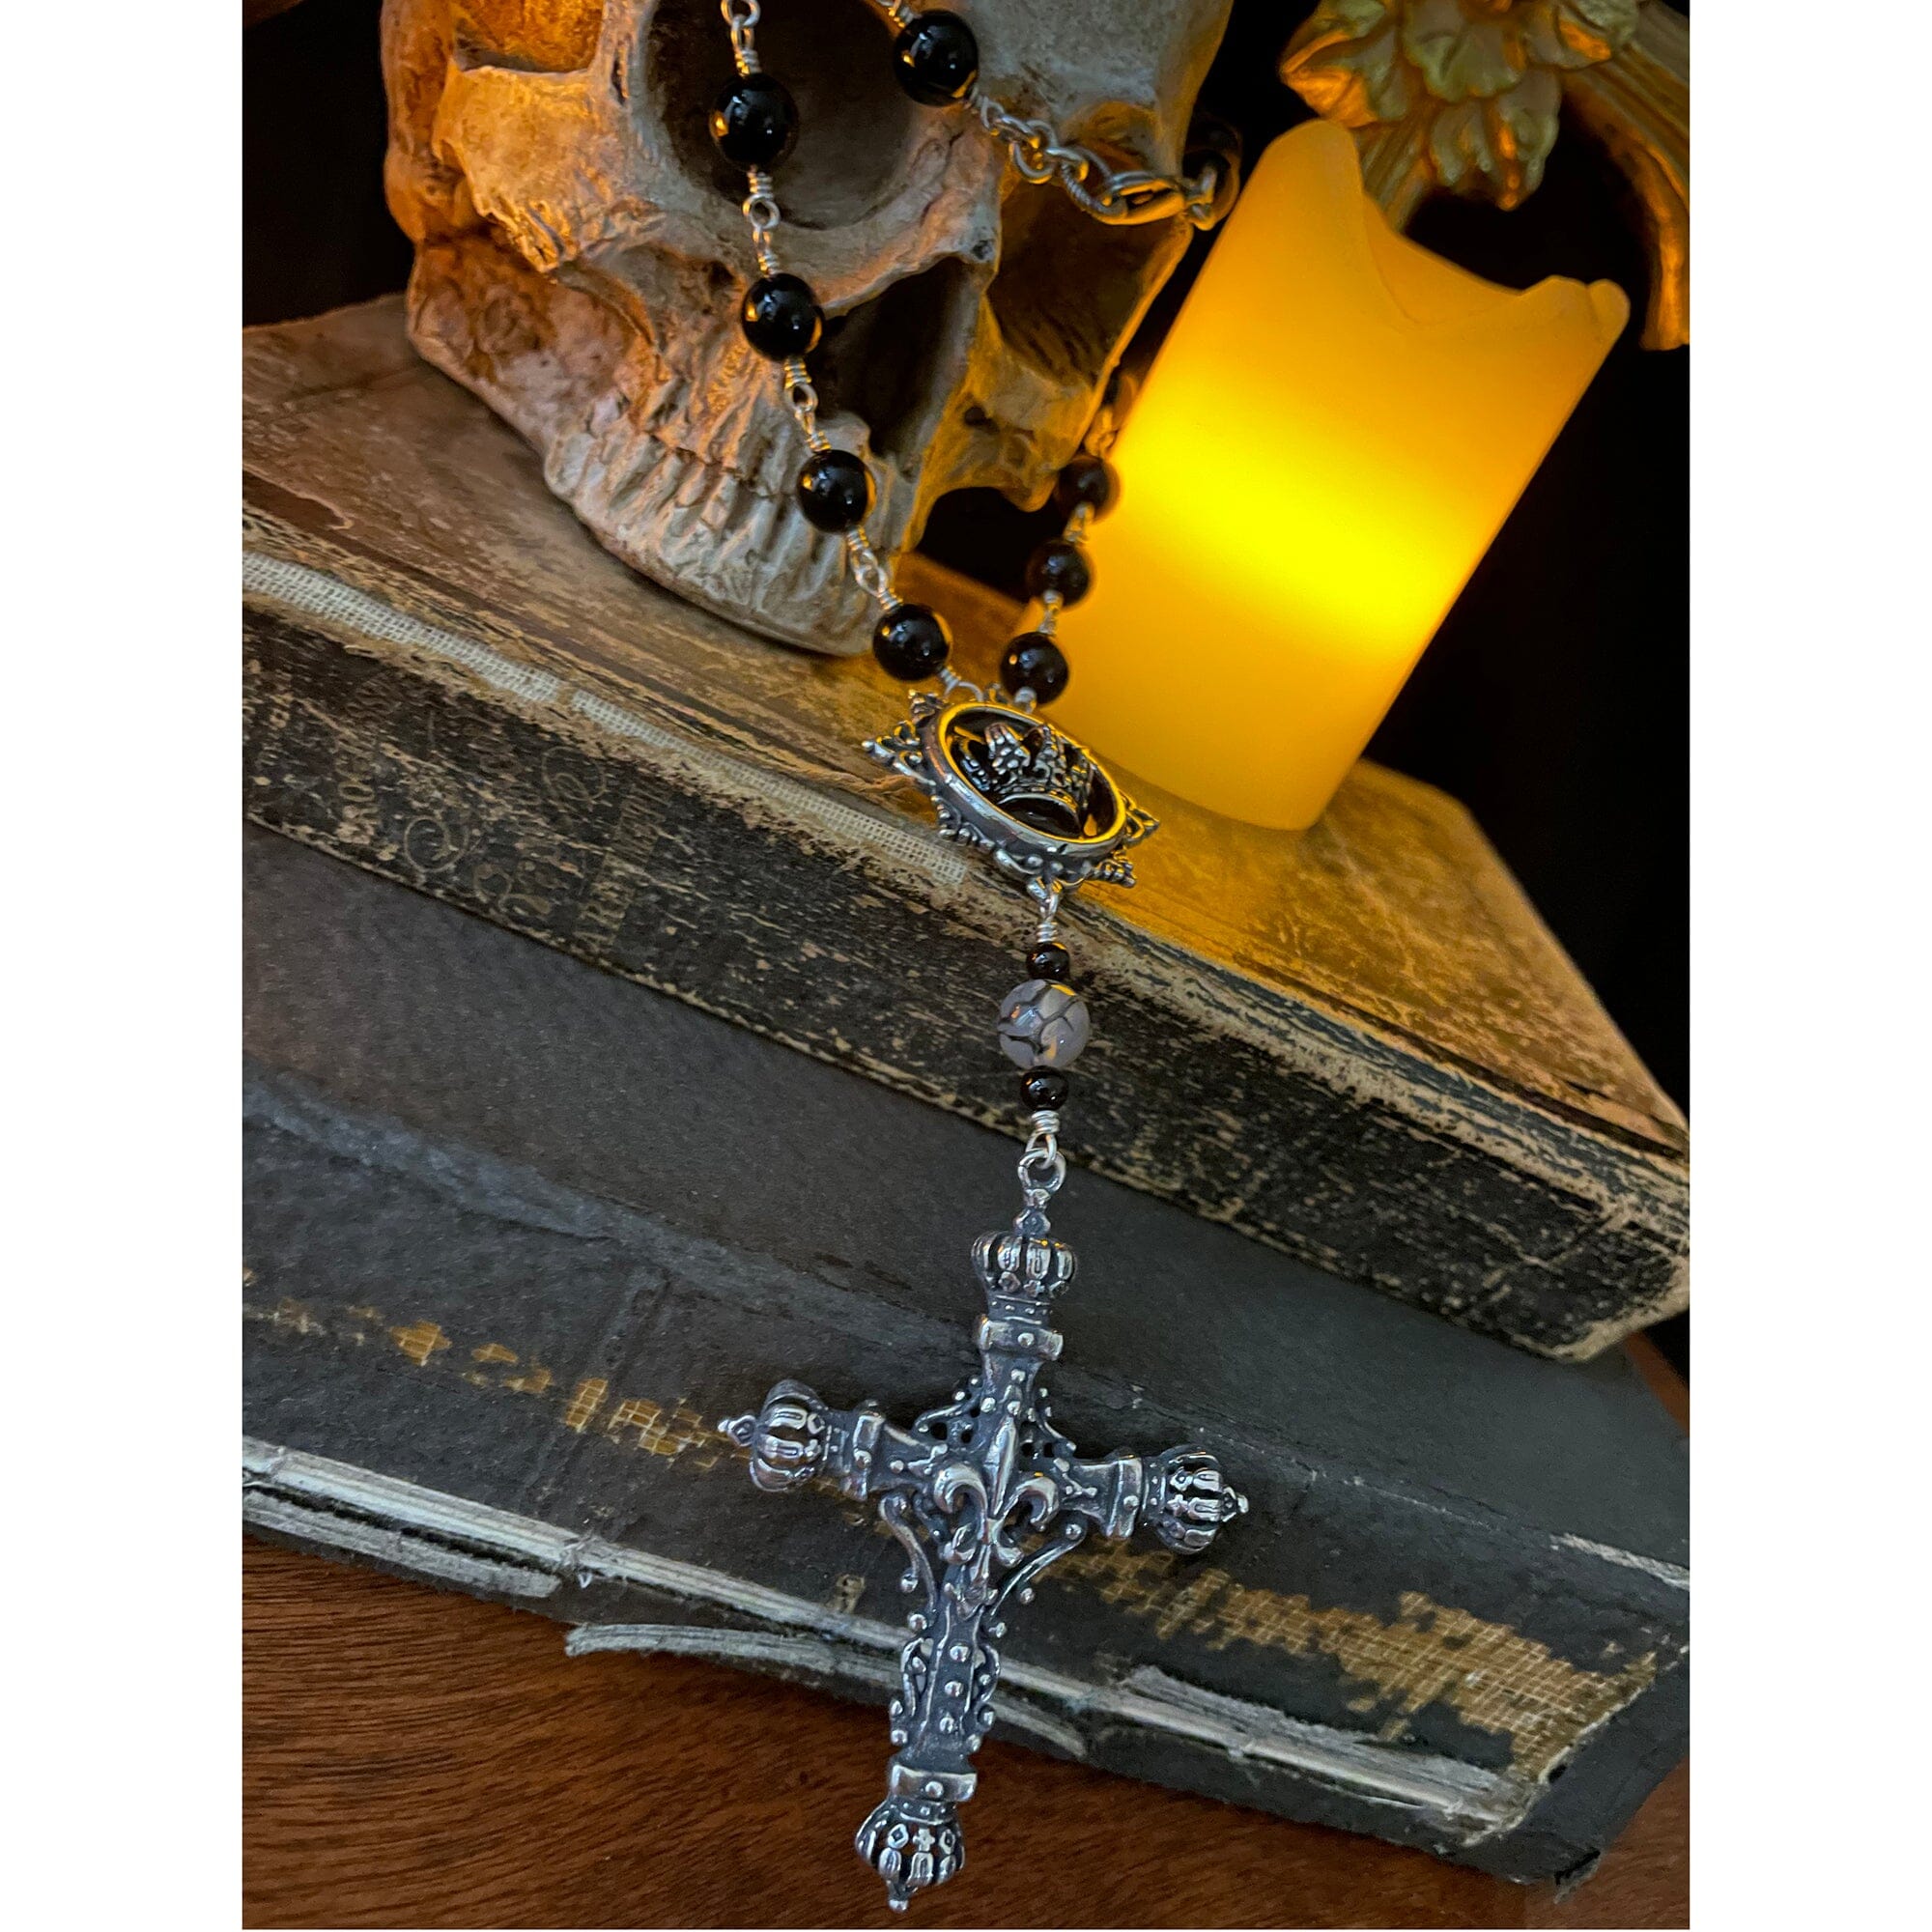 Bold Rosary Necklace with Fleur-de-lis cross pendant and onyx beads. Rock My Wings